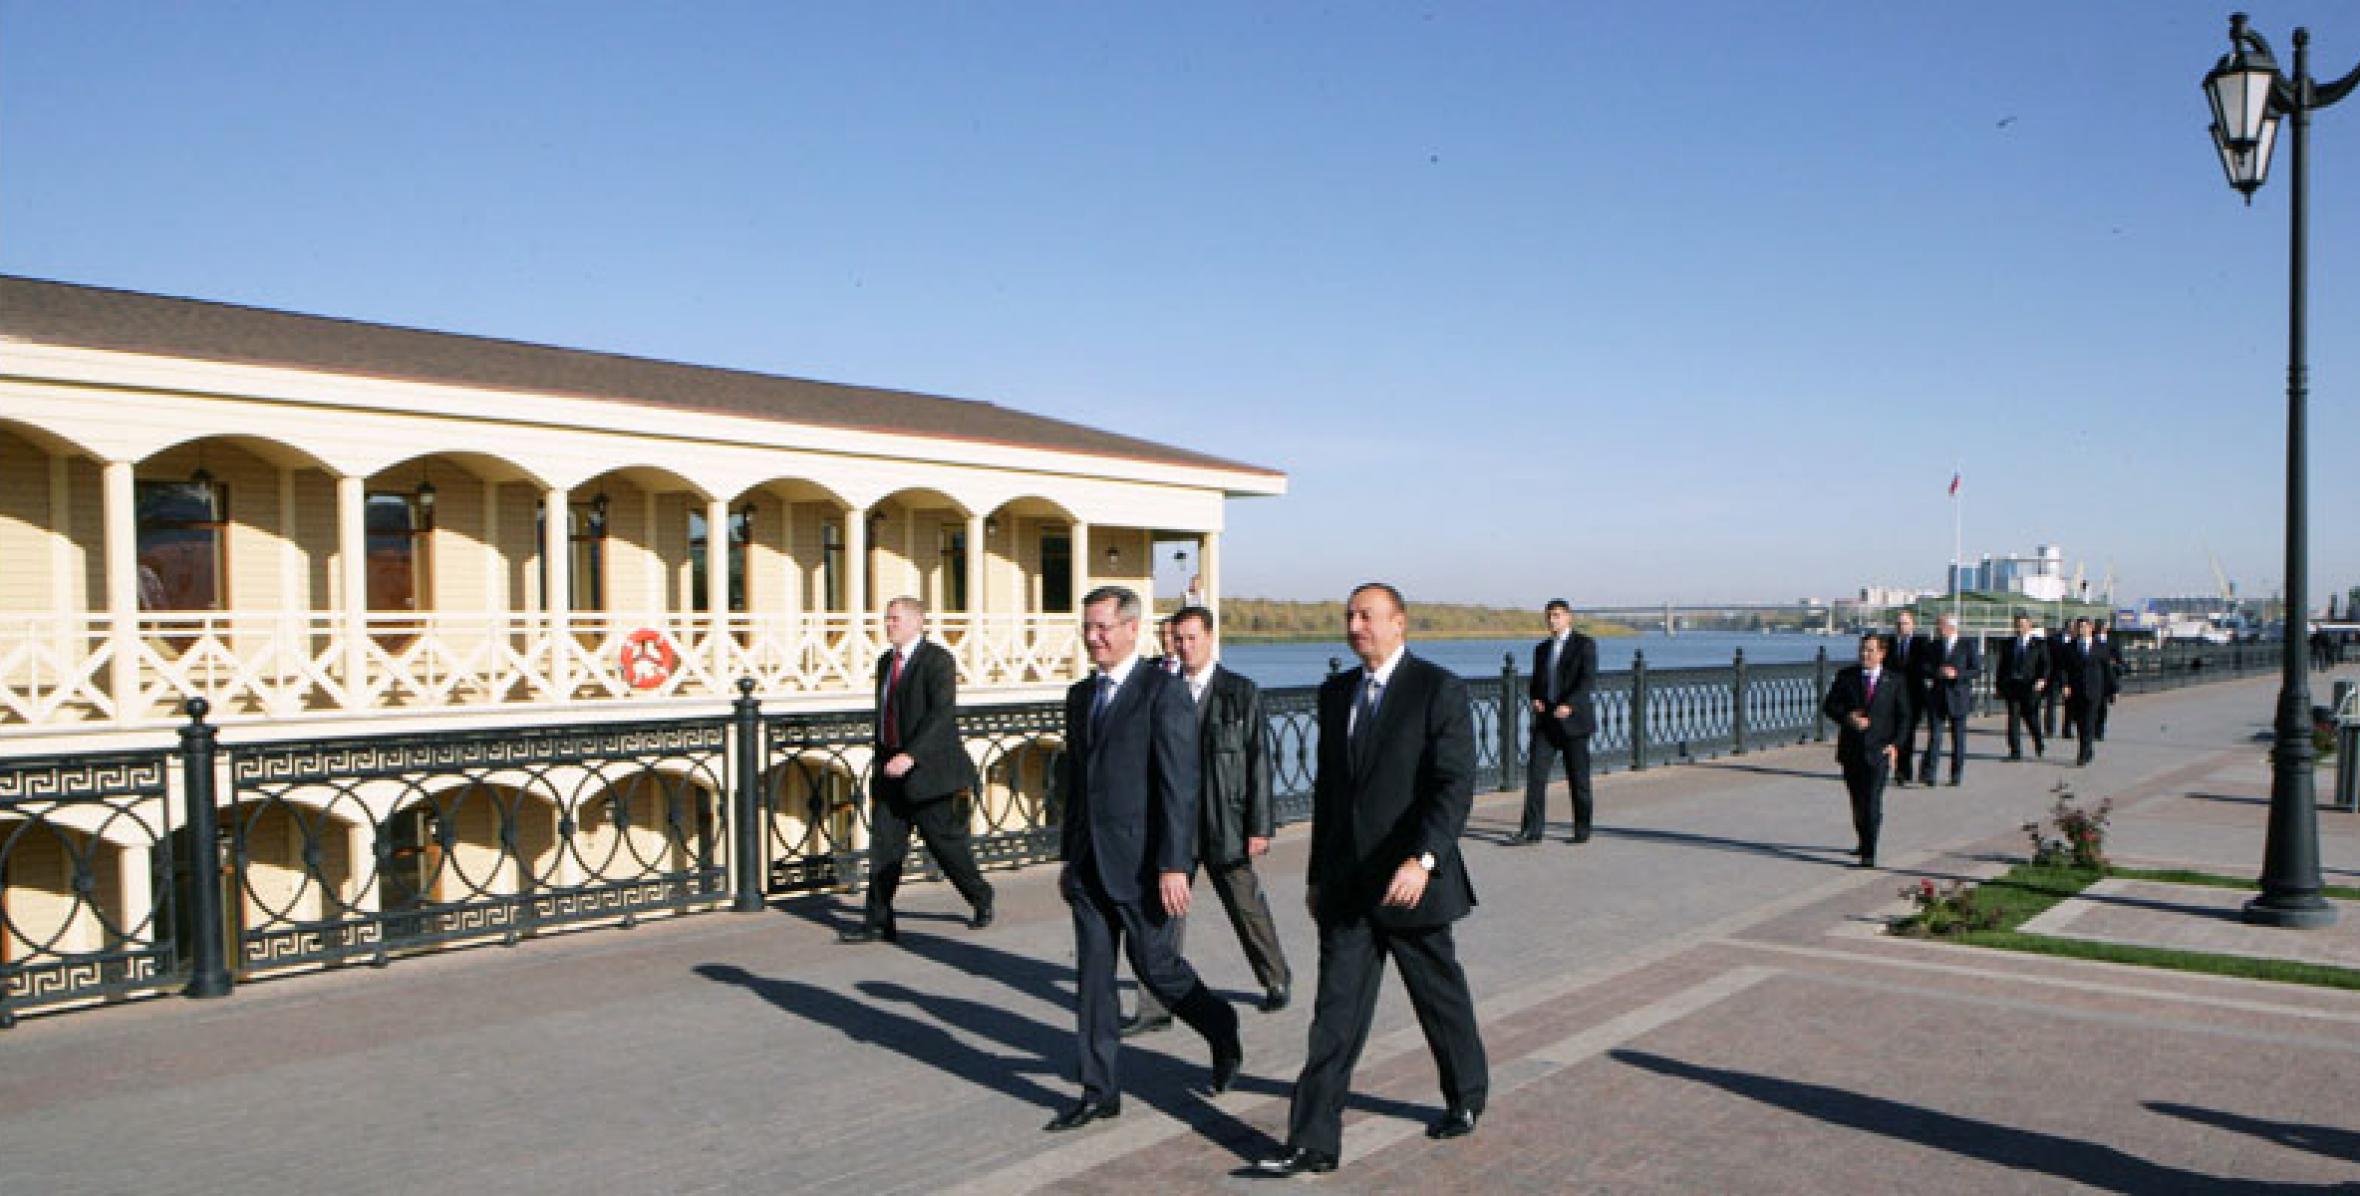 Ilham Aliyev toured the Kremlin of Astrakhan and other interesting places of the city